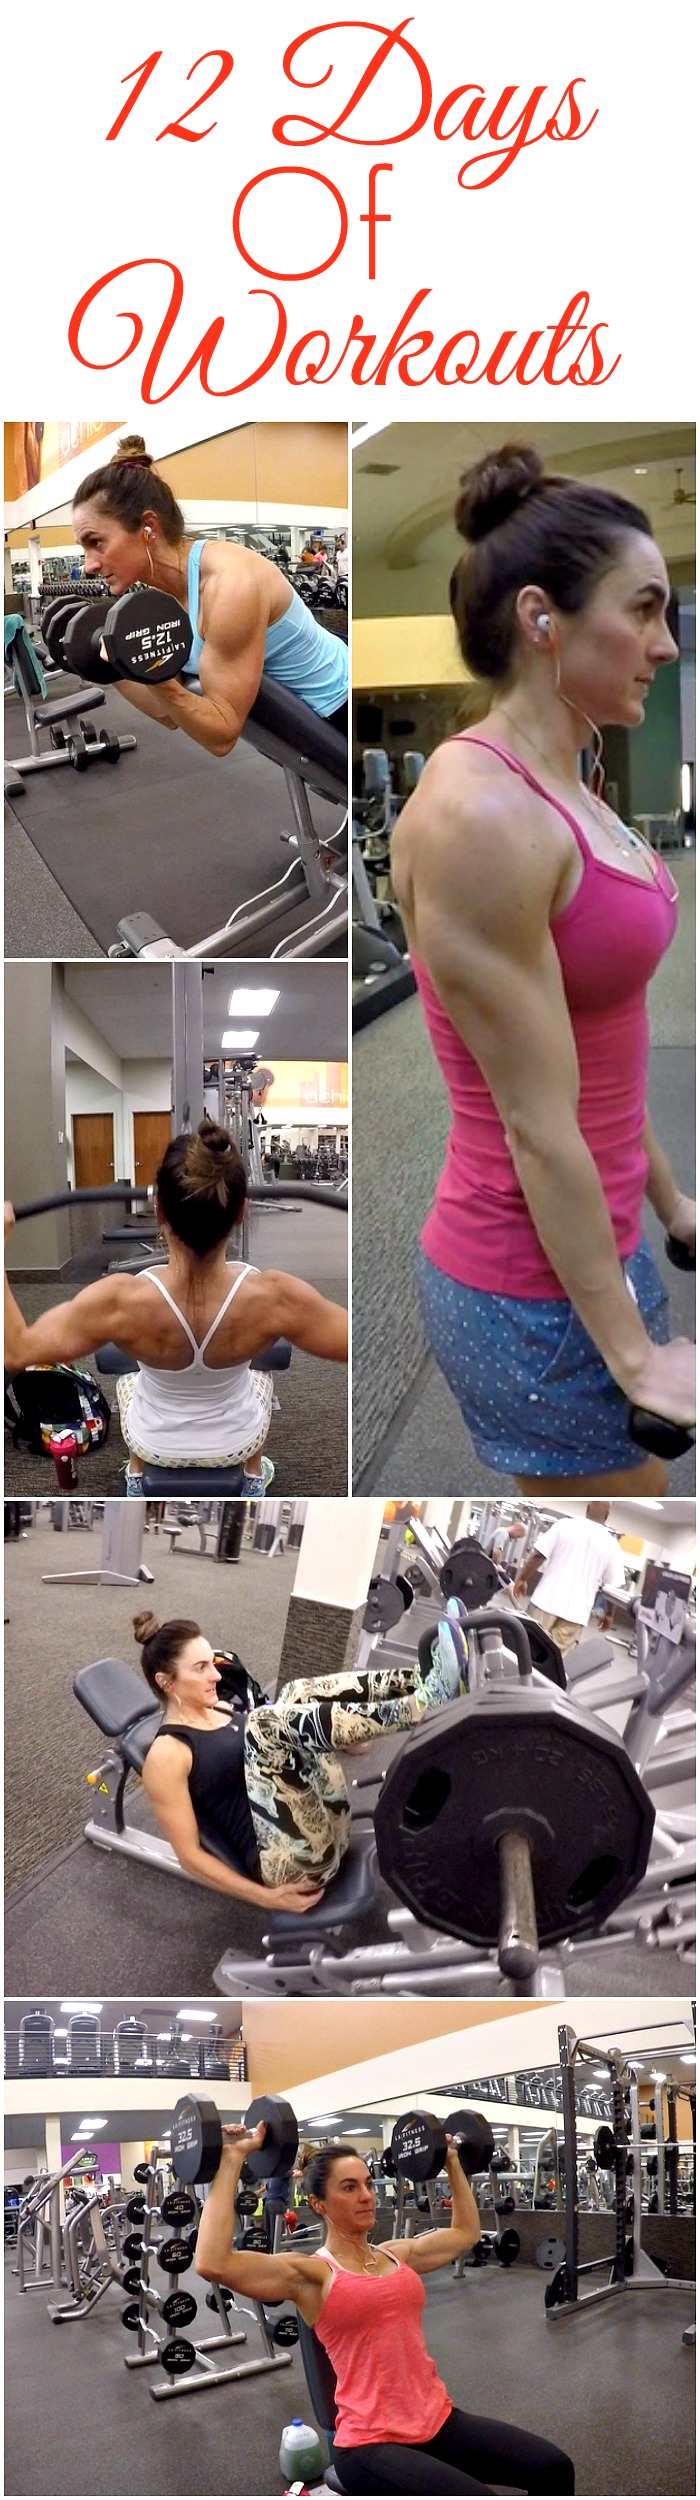 12_days_of_workouts